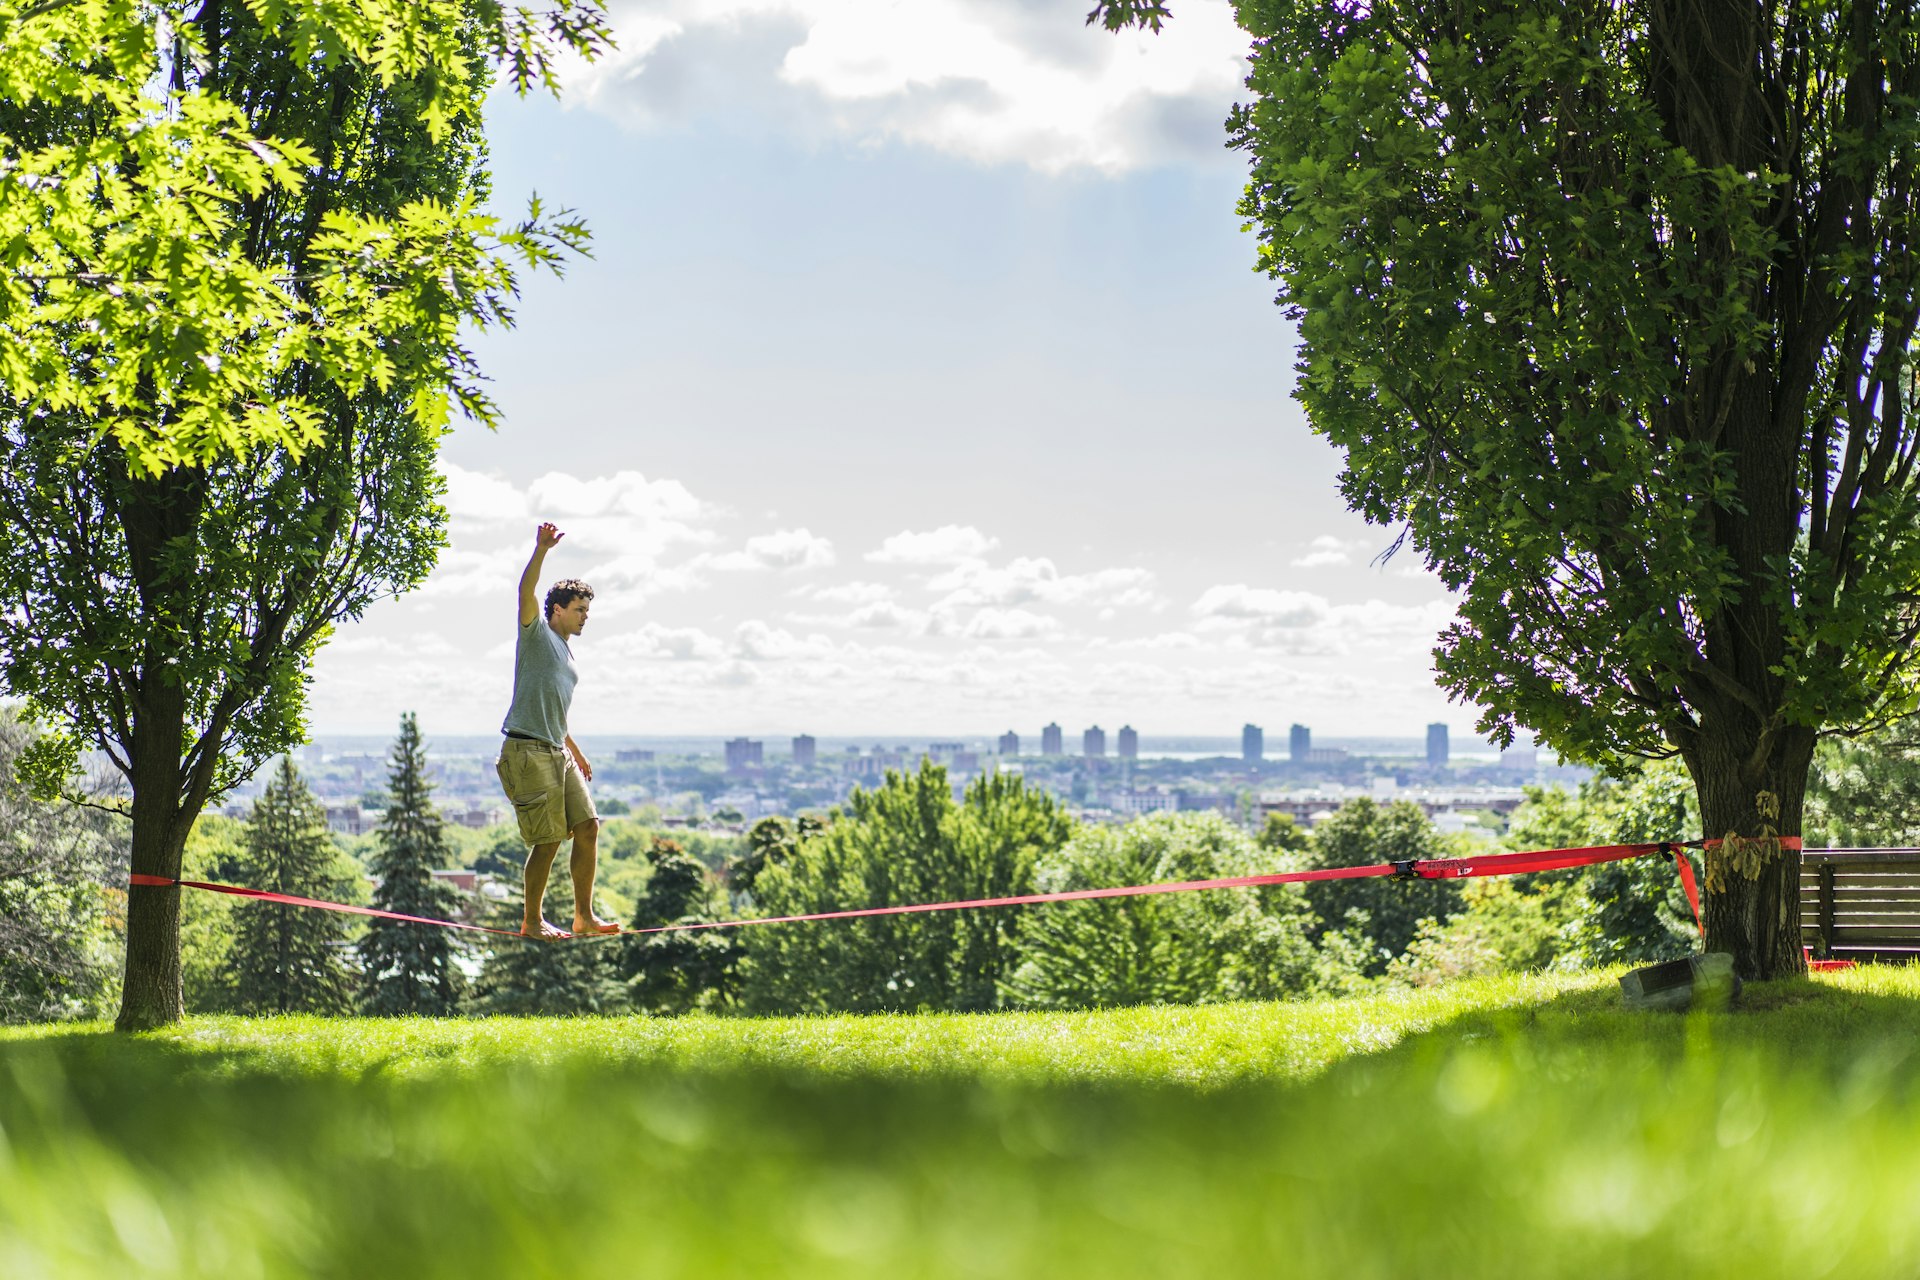 A man practising slacklining in a park overlooking Montreal's skyline